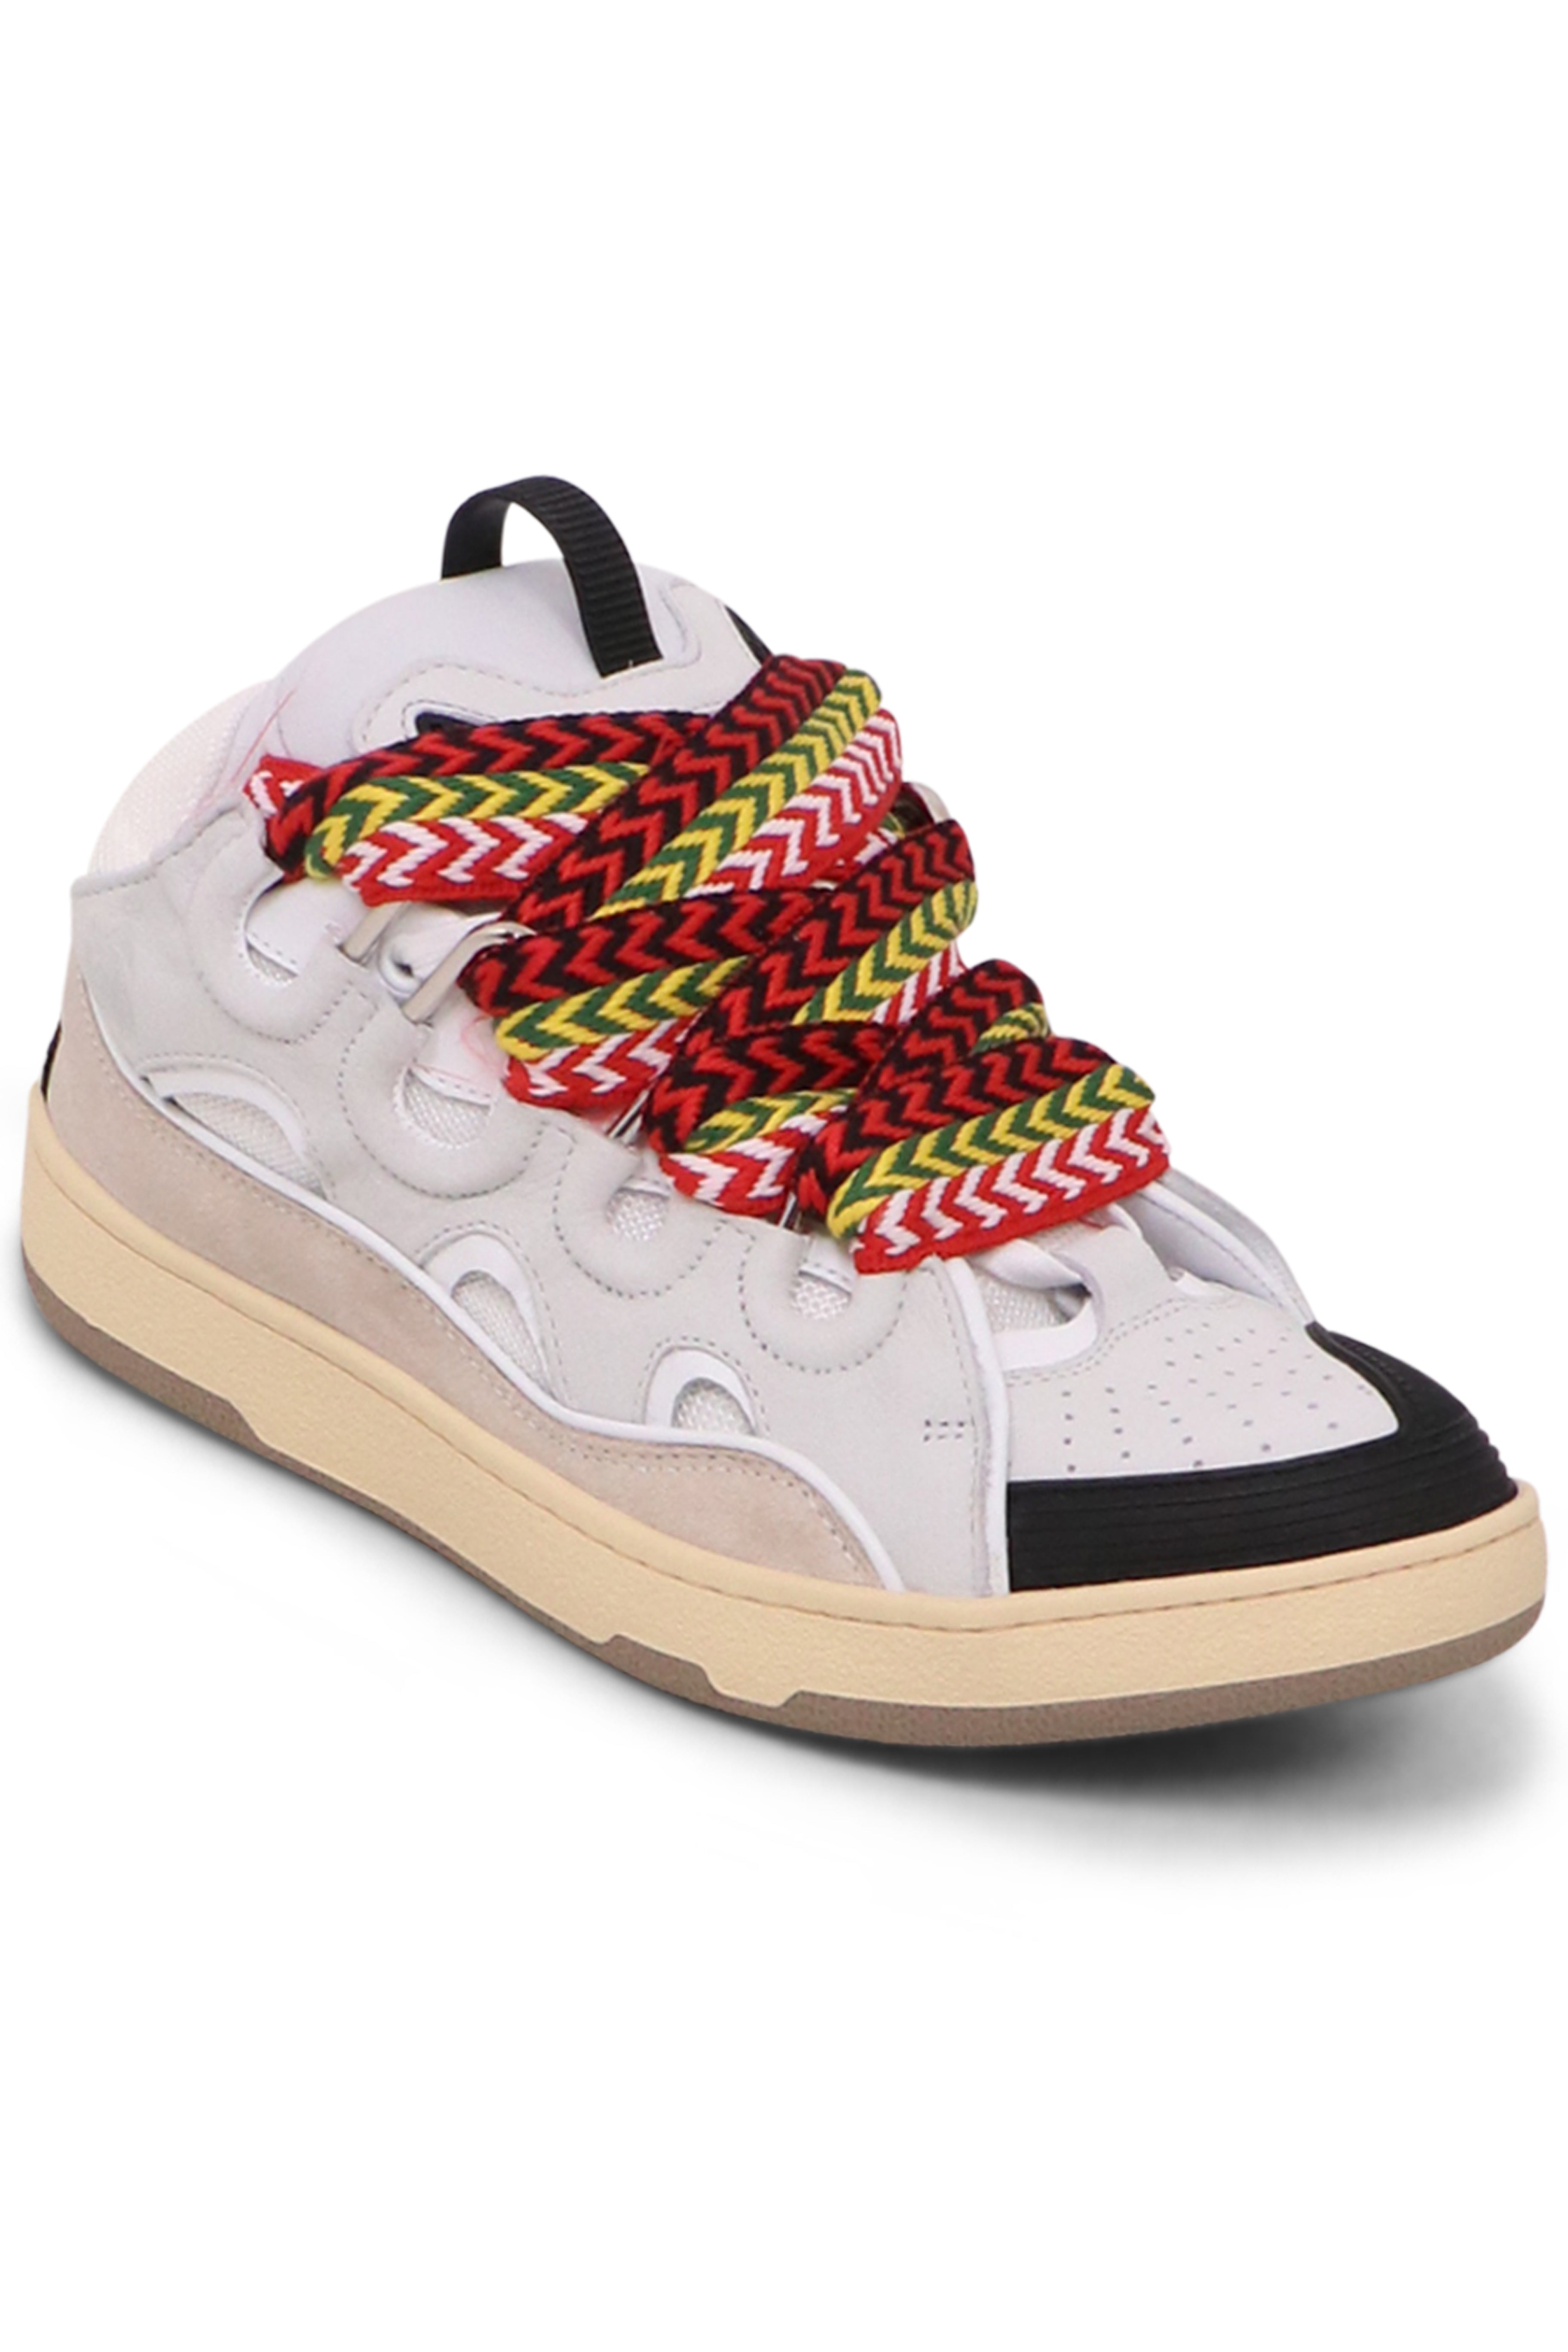 LANVIN SHOES CURB SNEAKERS | WHITE